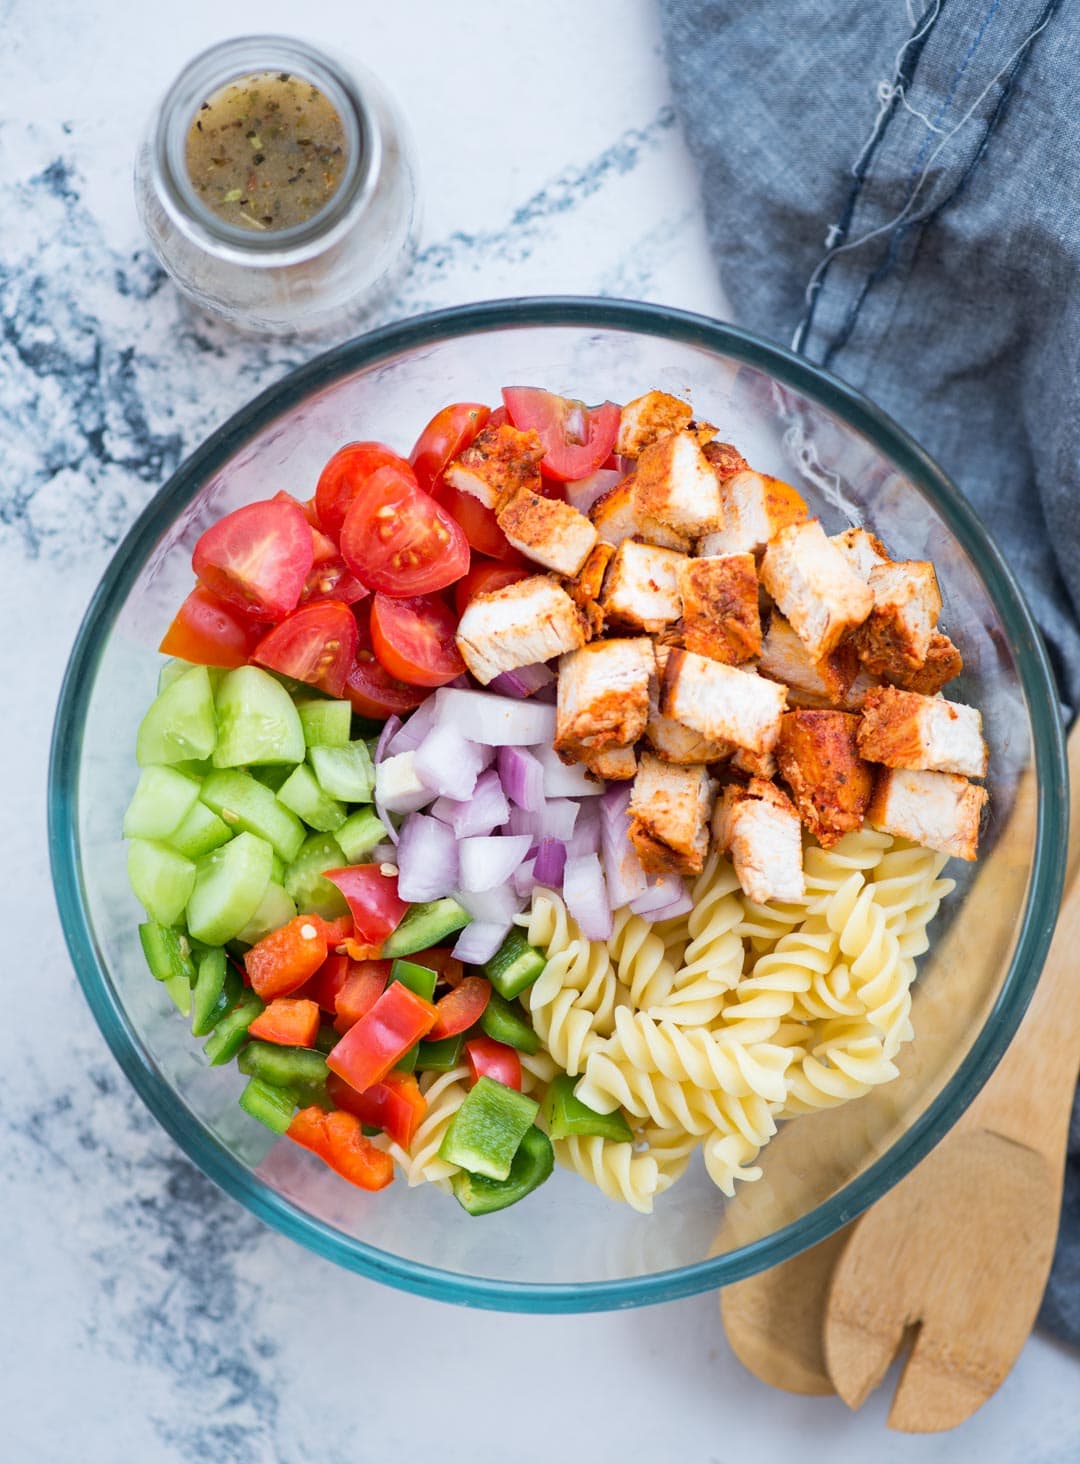 Chicken Pasta Salad for summer barbecues or light lunch. Grilled Chicken, Pasta and veggies tossed in a refreshing Lemon Herb Dressing is so delicious and filled with goodness.